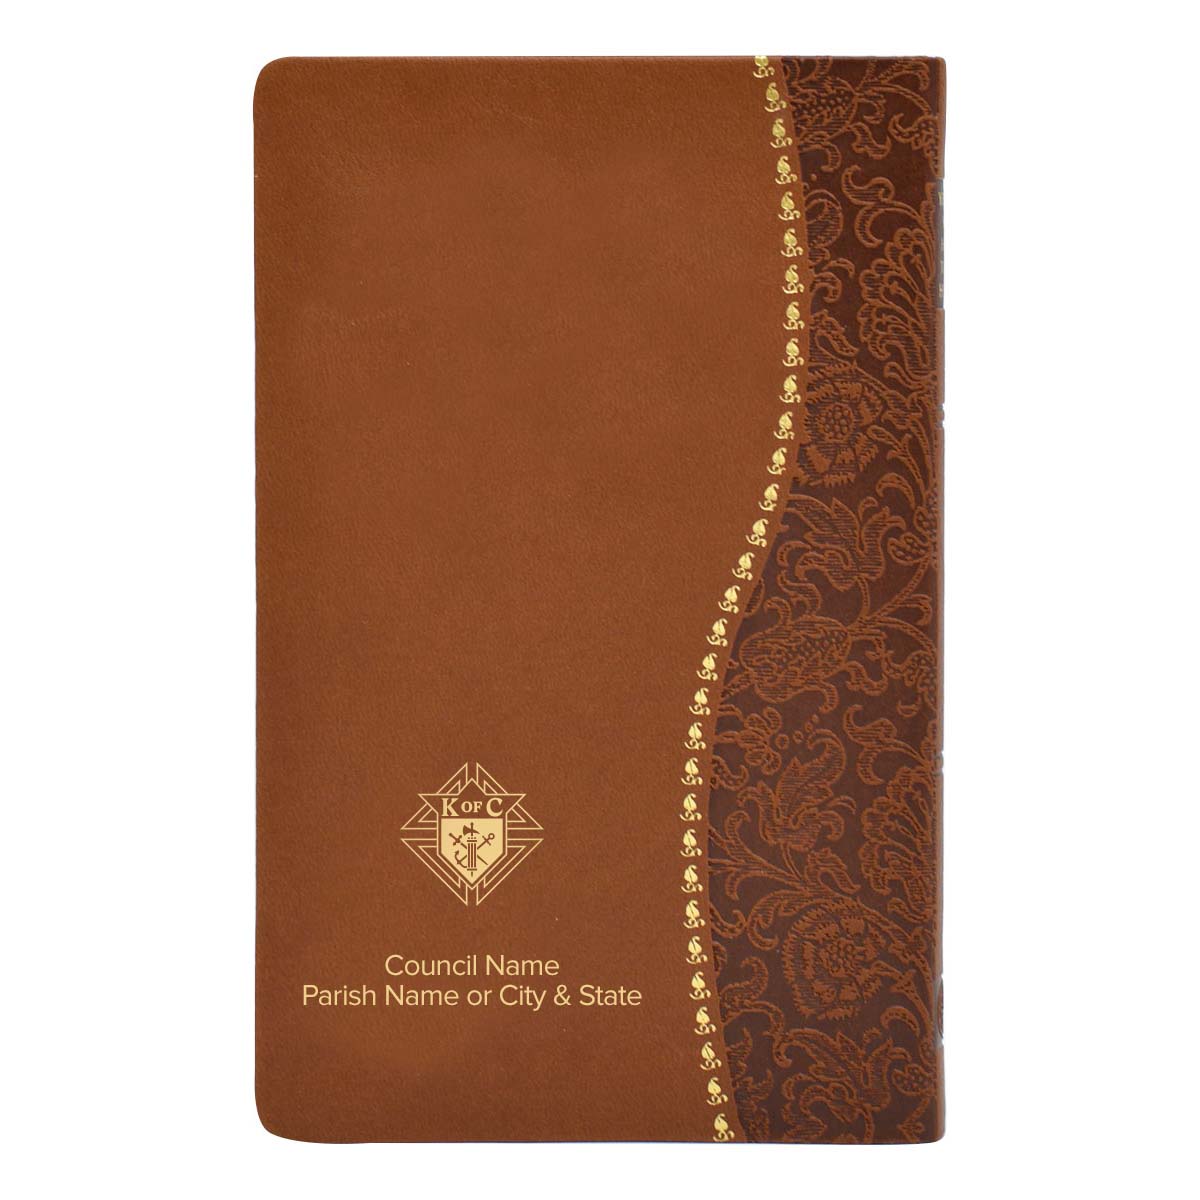 Day By Day with St. Joseph Book - Custom Council